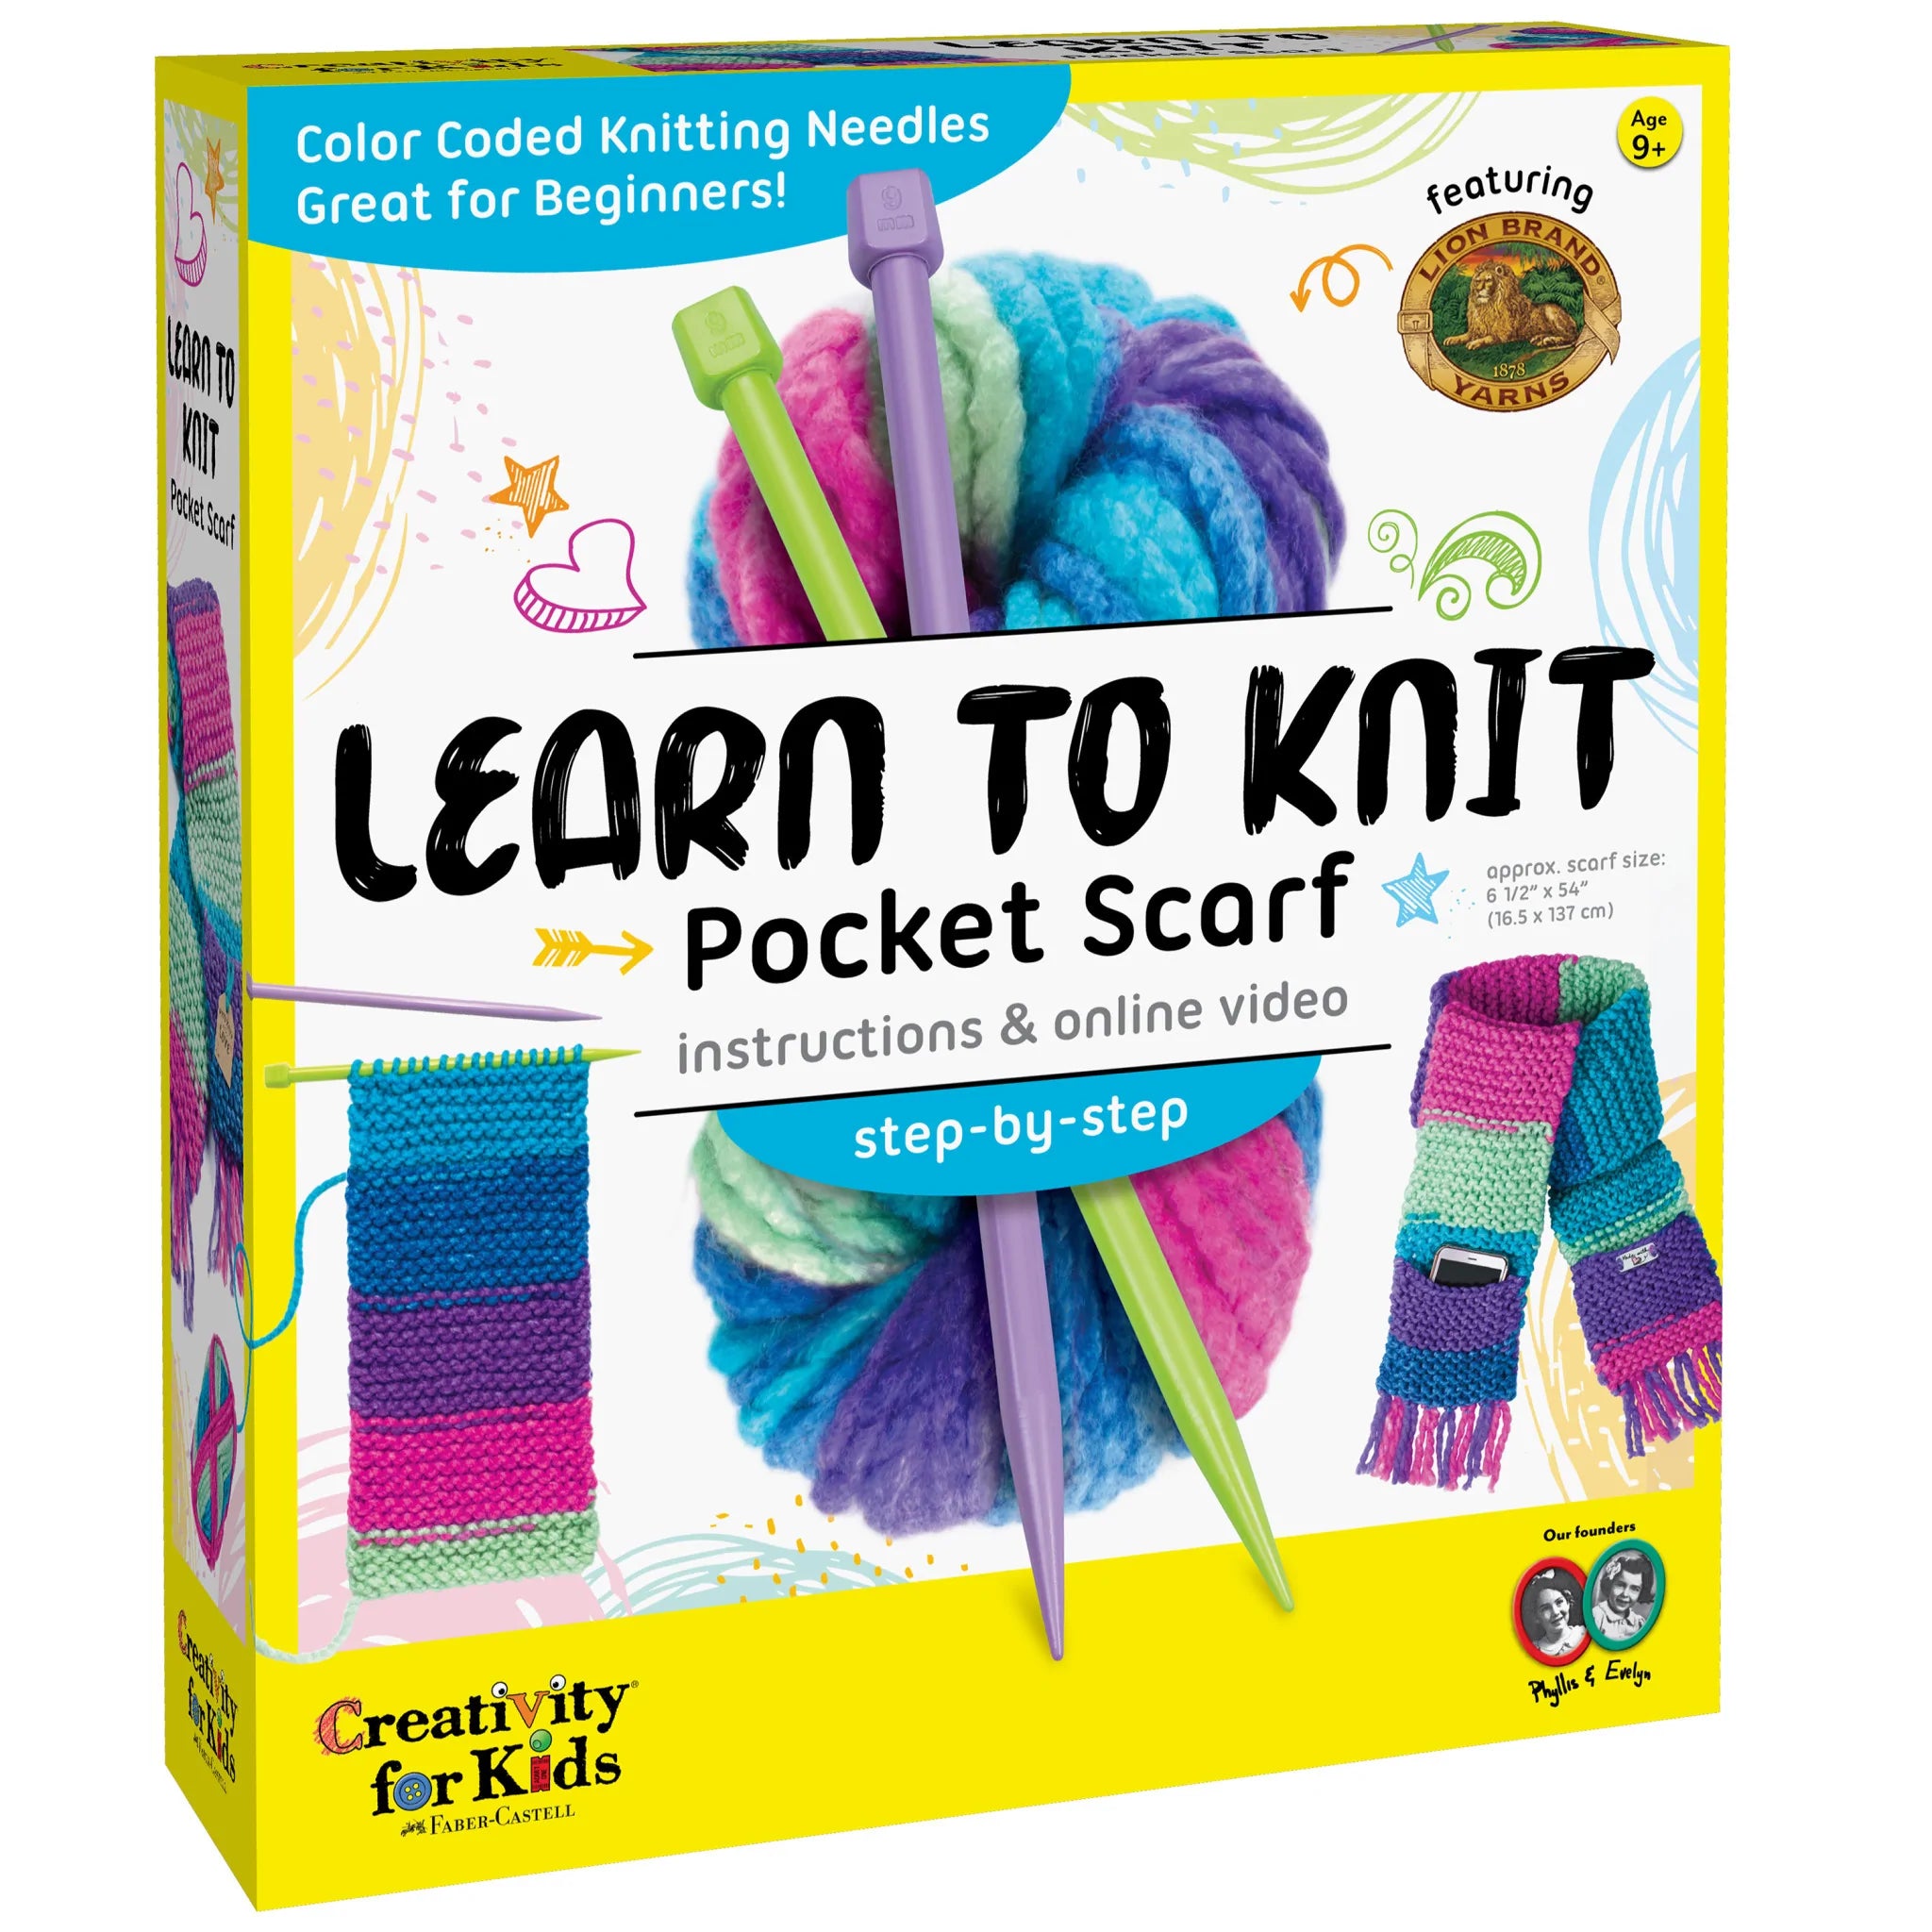 LEARN TO KNOT POCKET SCARF